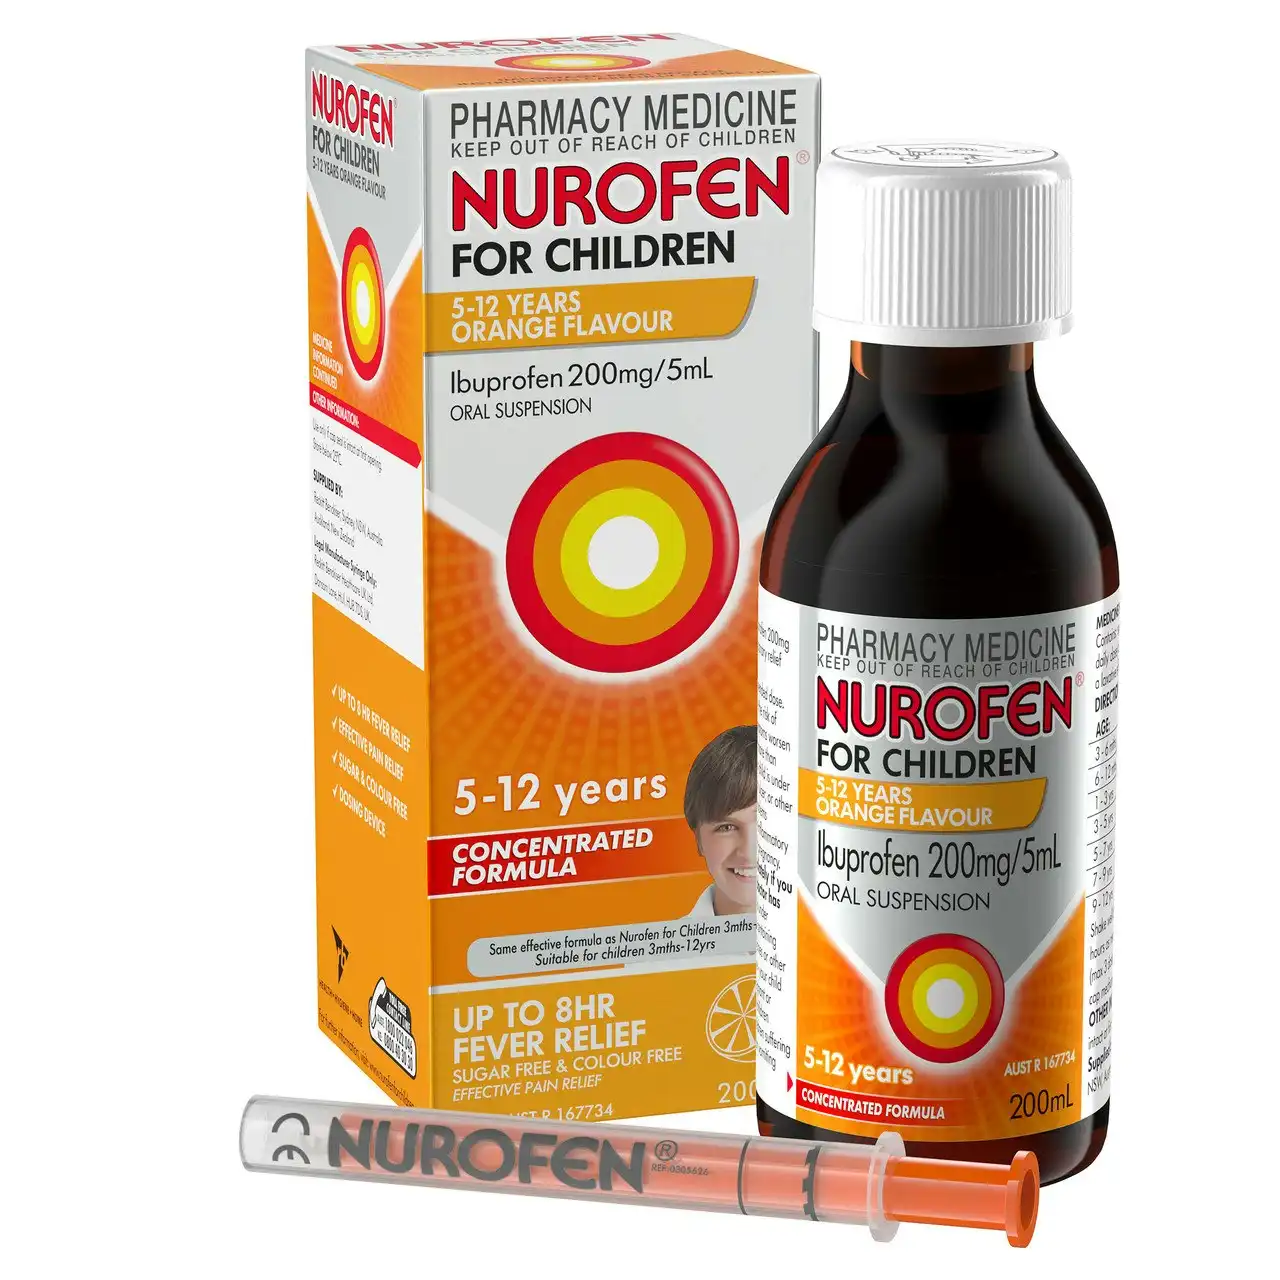 Nurofen For Children 5-12yrs Pain and Fever Relief Concentrated Liquid 200mg/5mL Ibuprofen Orange 200mL